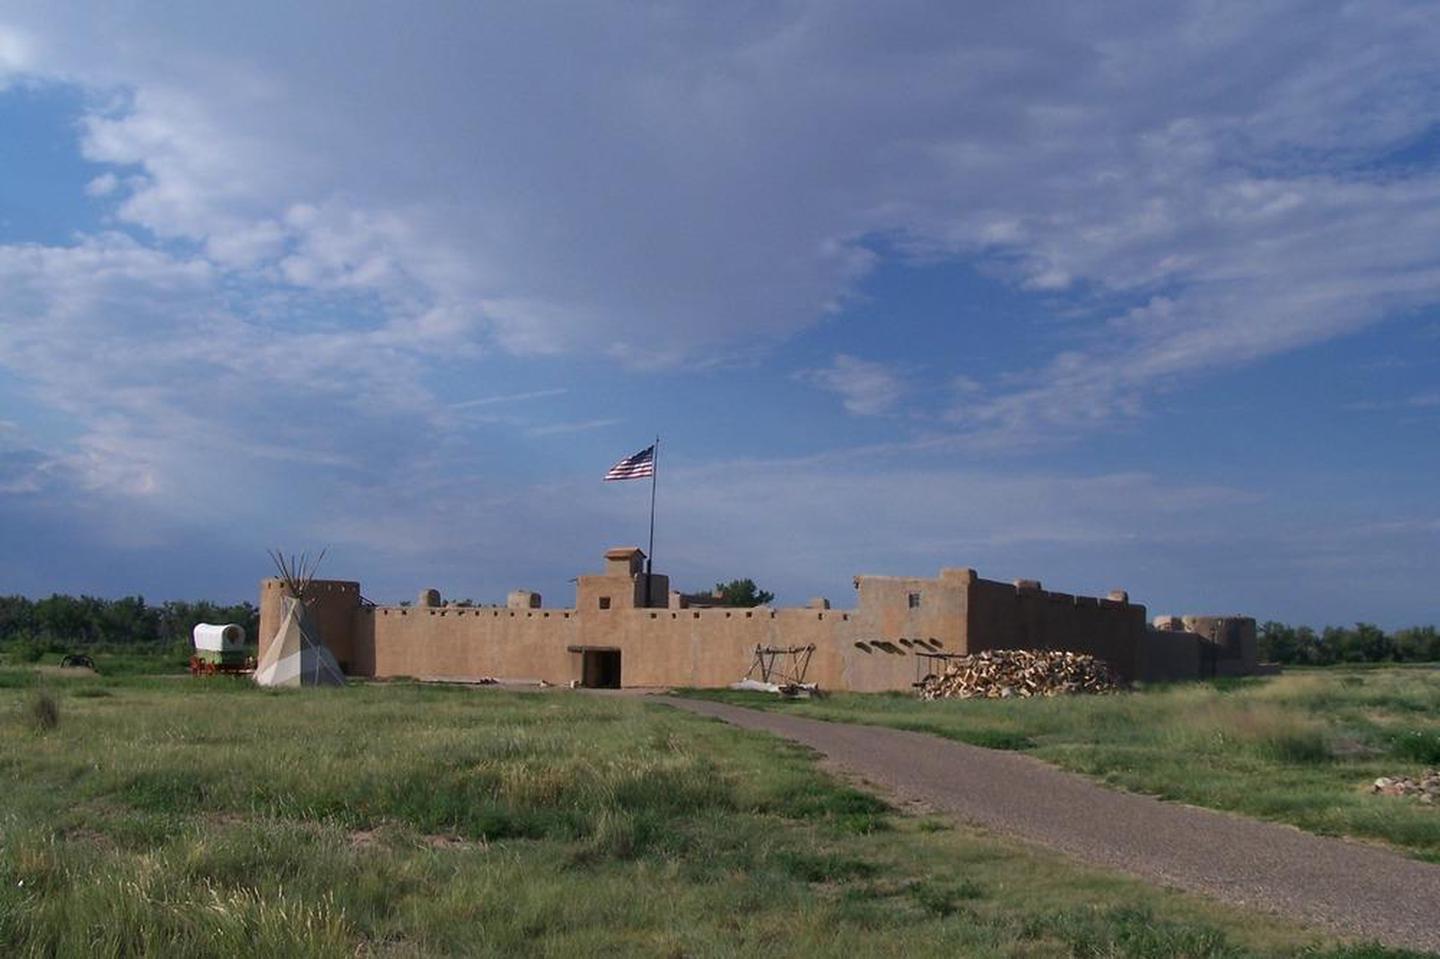 Bent's Old FortBent's Old Fort was the only permanent white settlement on the Santa Fe Trail between Missouri and Santa Fe.